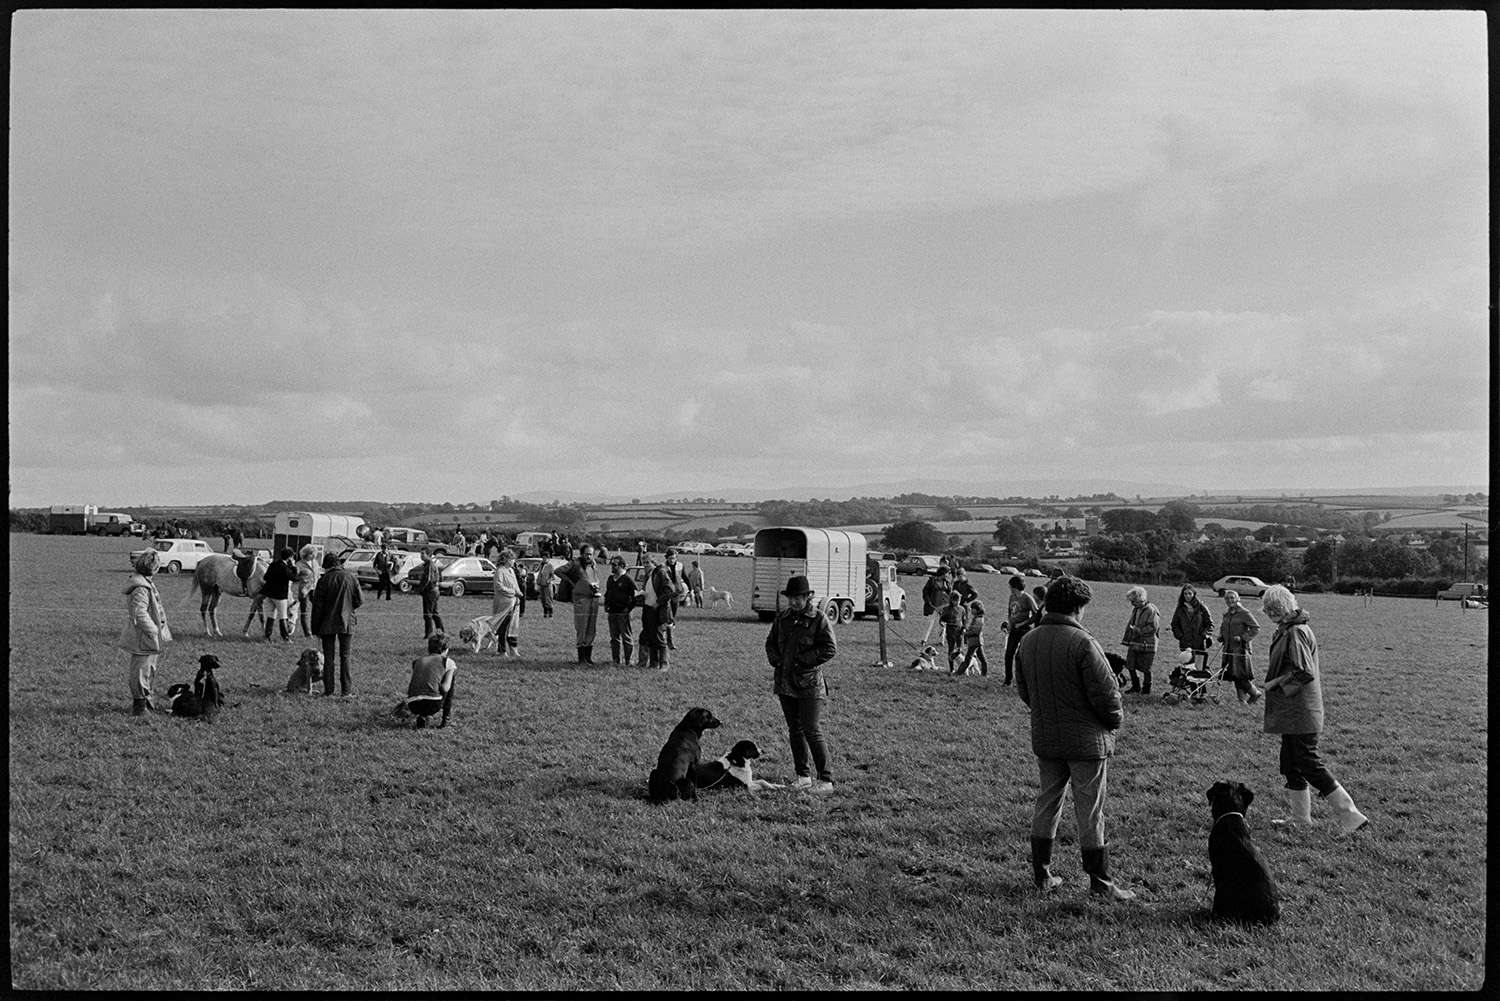 Dogs and owners at dog show, being judged.
[Dogs sat by their owners and being judged in a dog show at Dolton Gymkhana. The judging is being watched by men, women and children. A saddled horse, horse boxes and cars are visible in the background, and a view of surrounding countryside.]